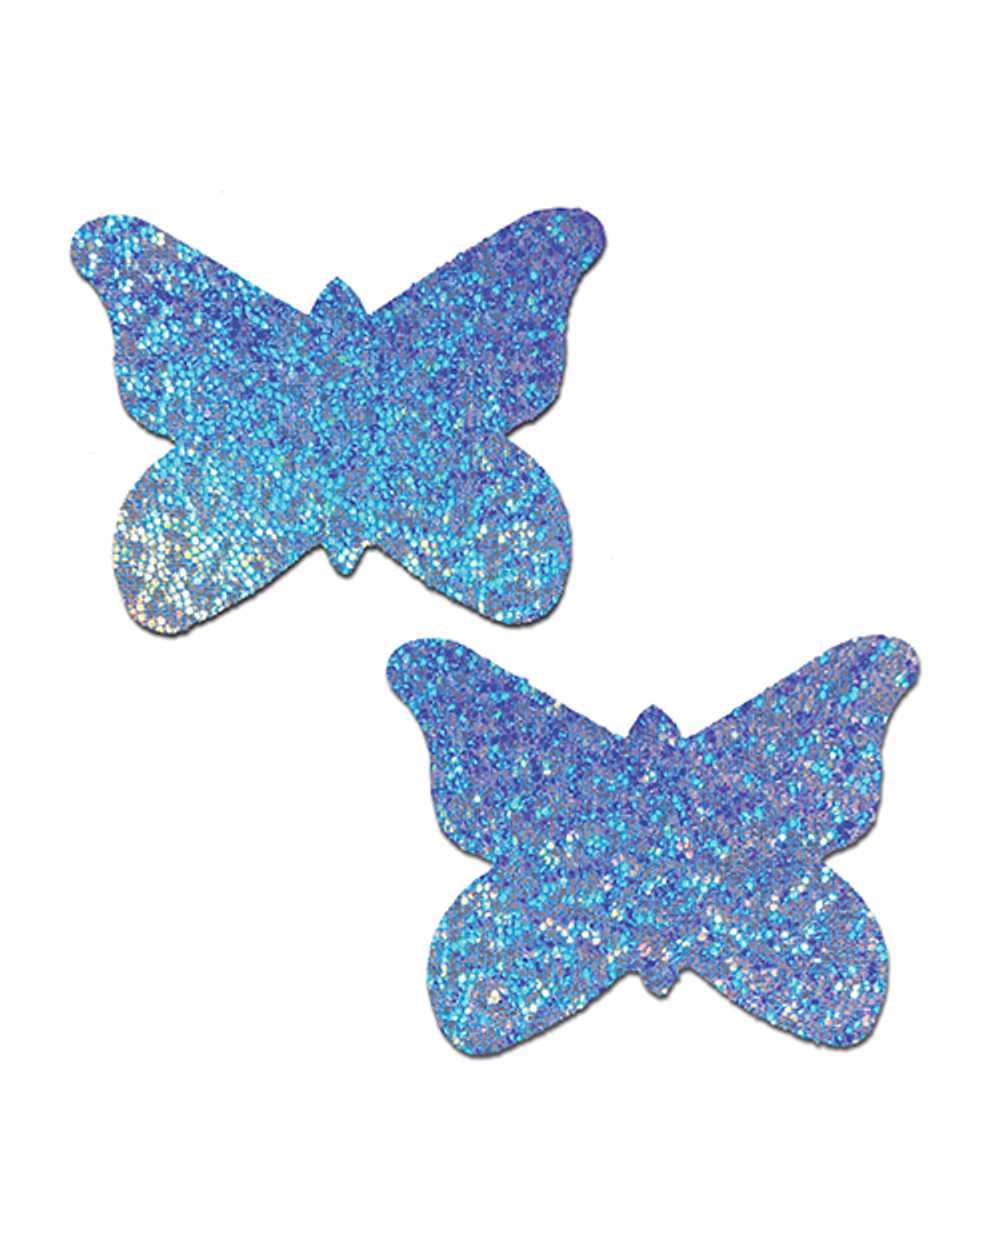 Pastease Premium Glitter Butterfly - O/s - image 2